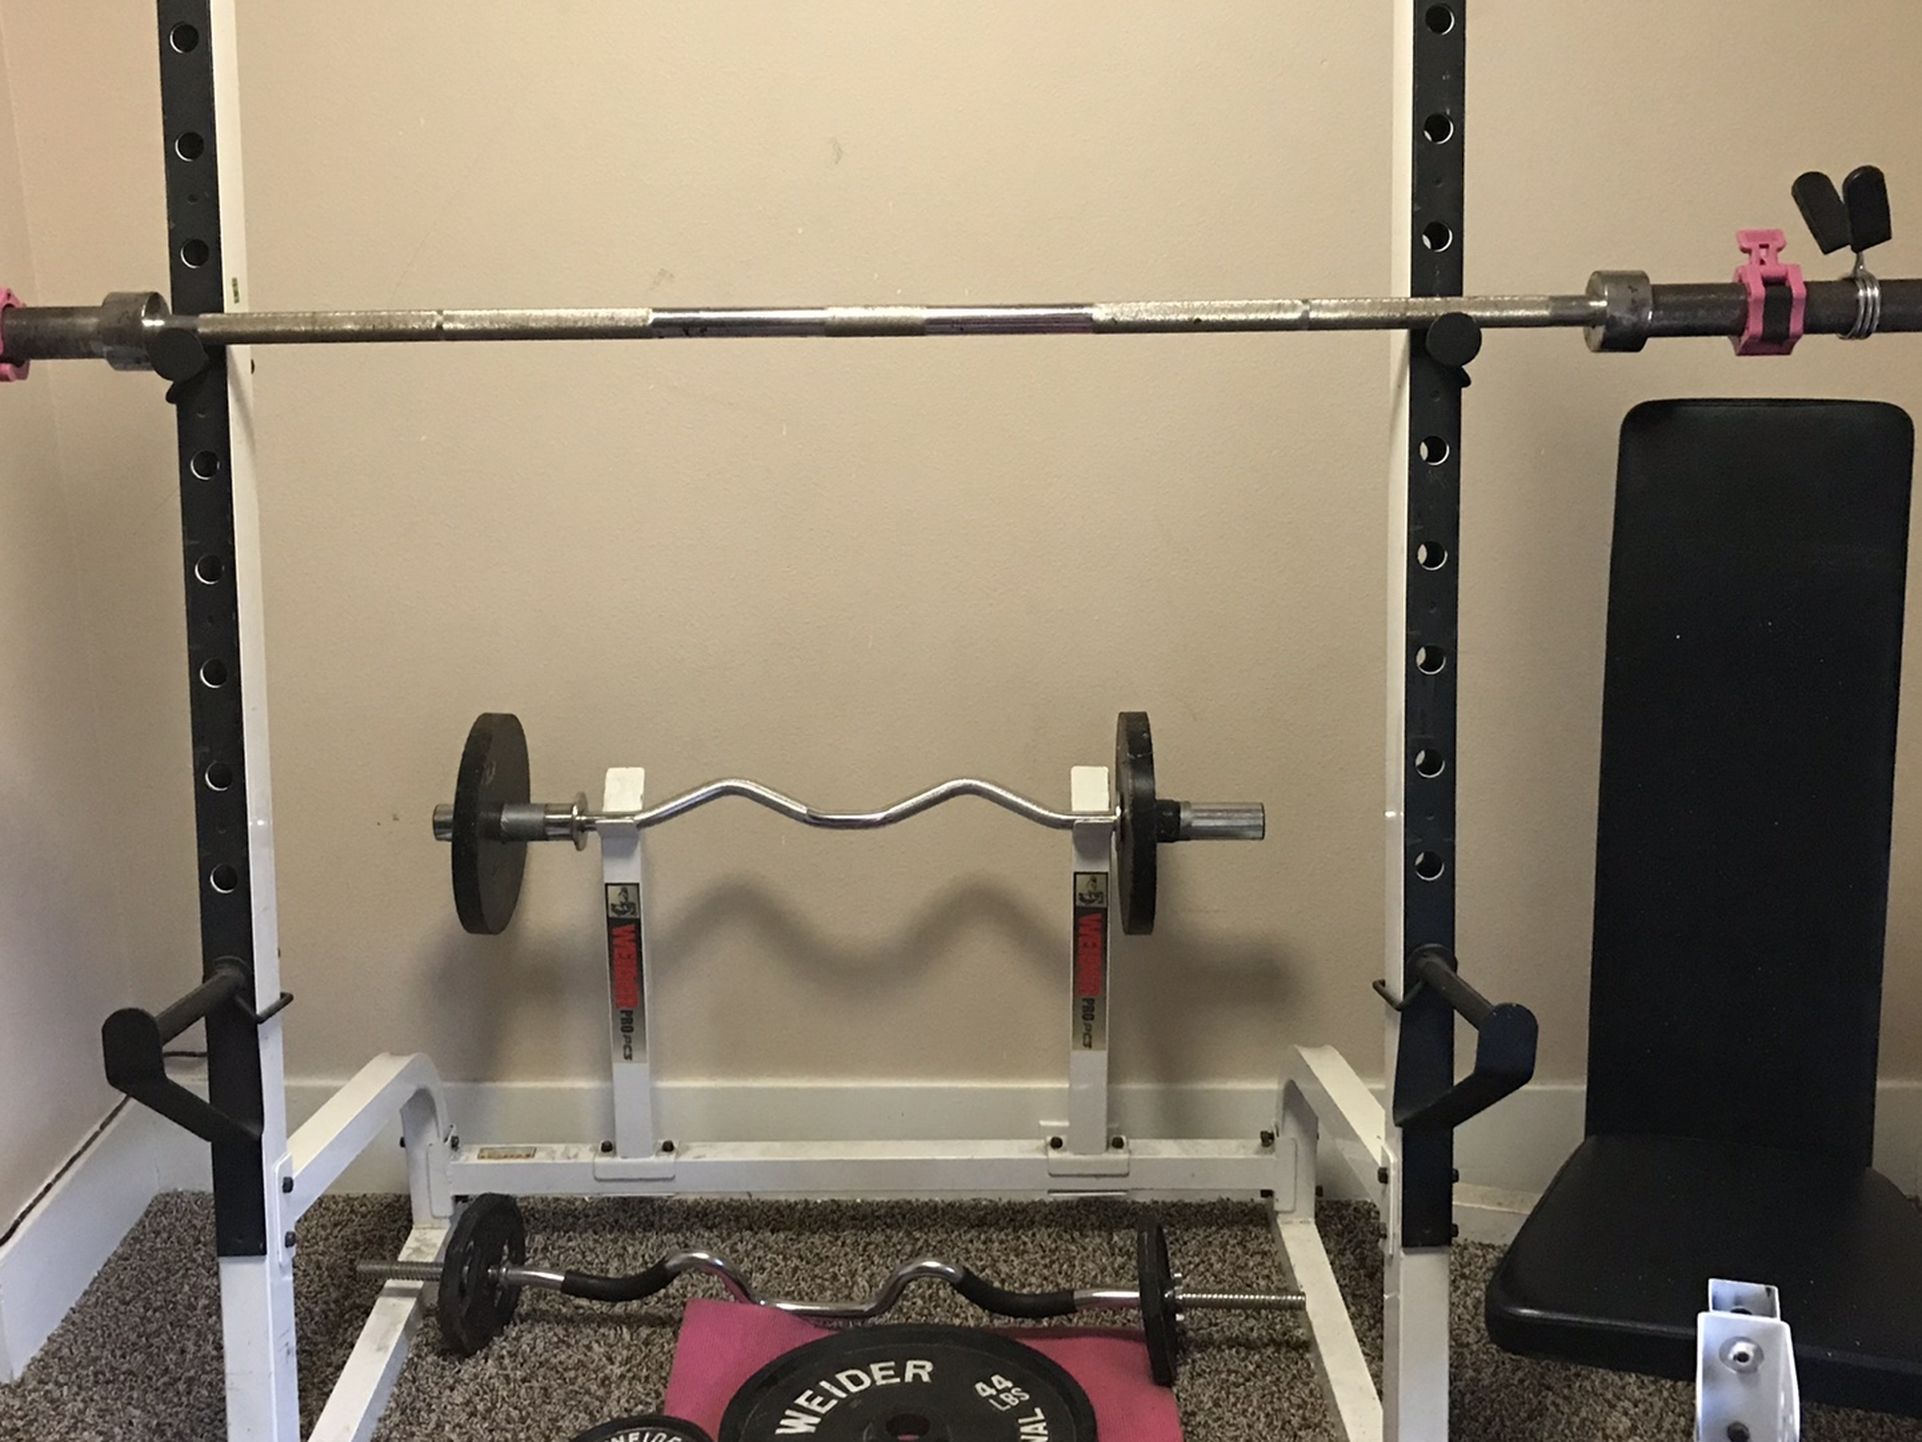 Home gym: squat rack with Olympic barbell weight set, curl bars, adjustable dumbbell set and adjustable bench